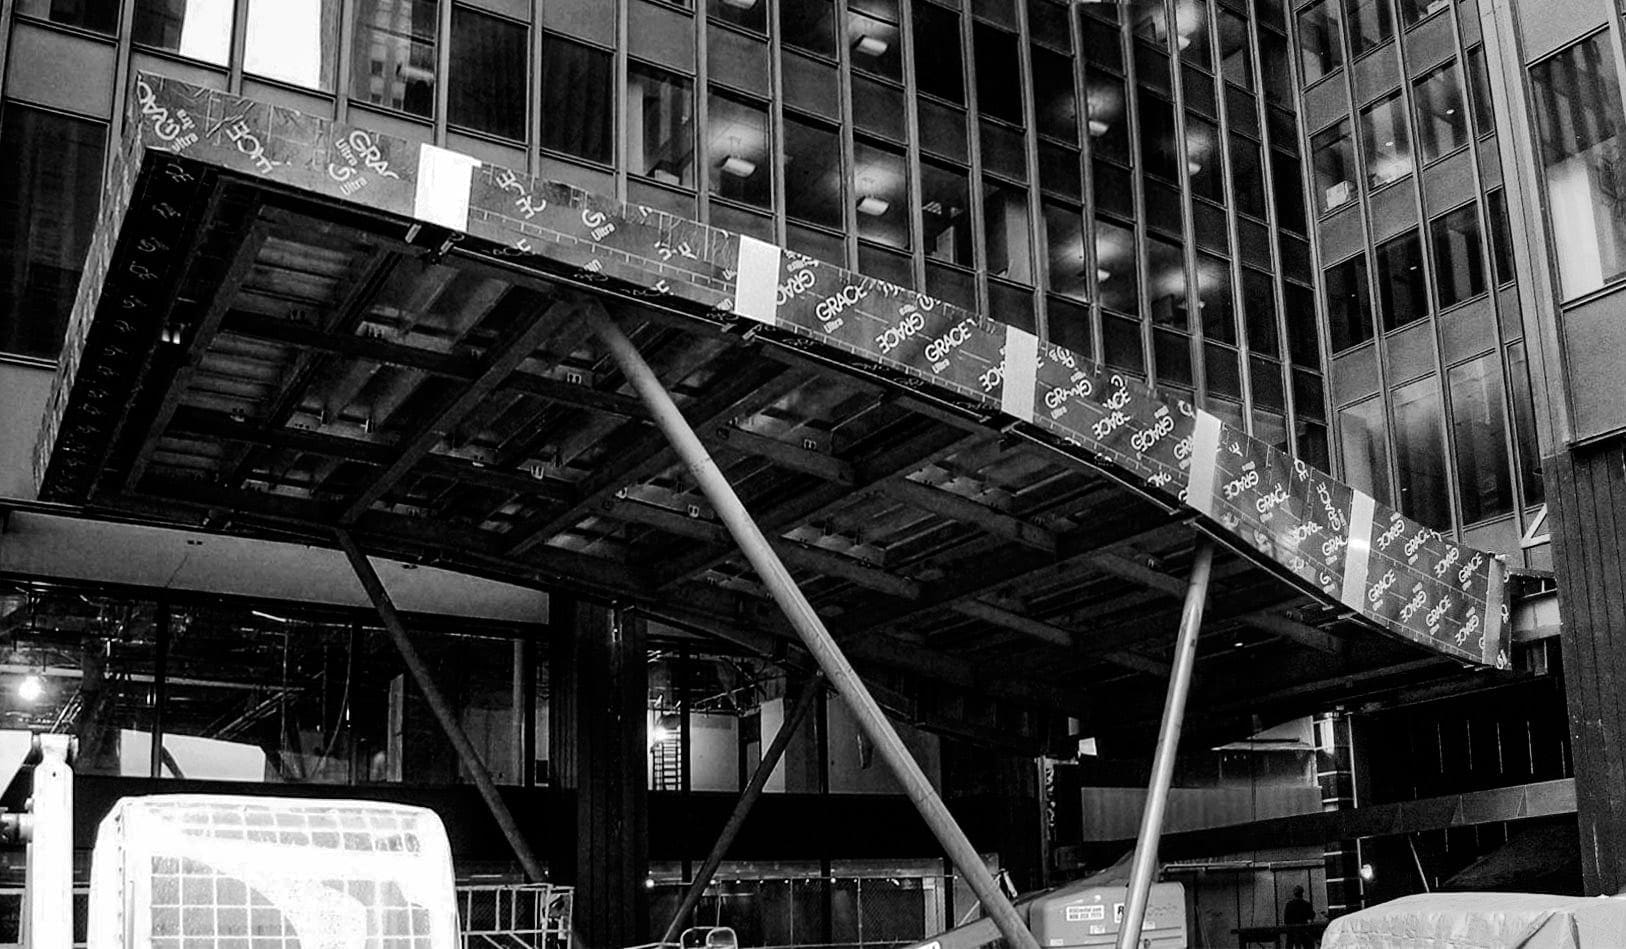 Construction photo of the Michigan Avenue Plaza awning in Chicago.